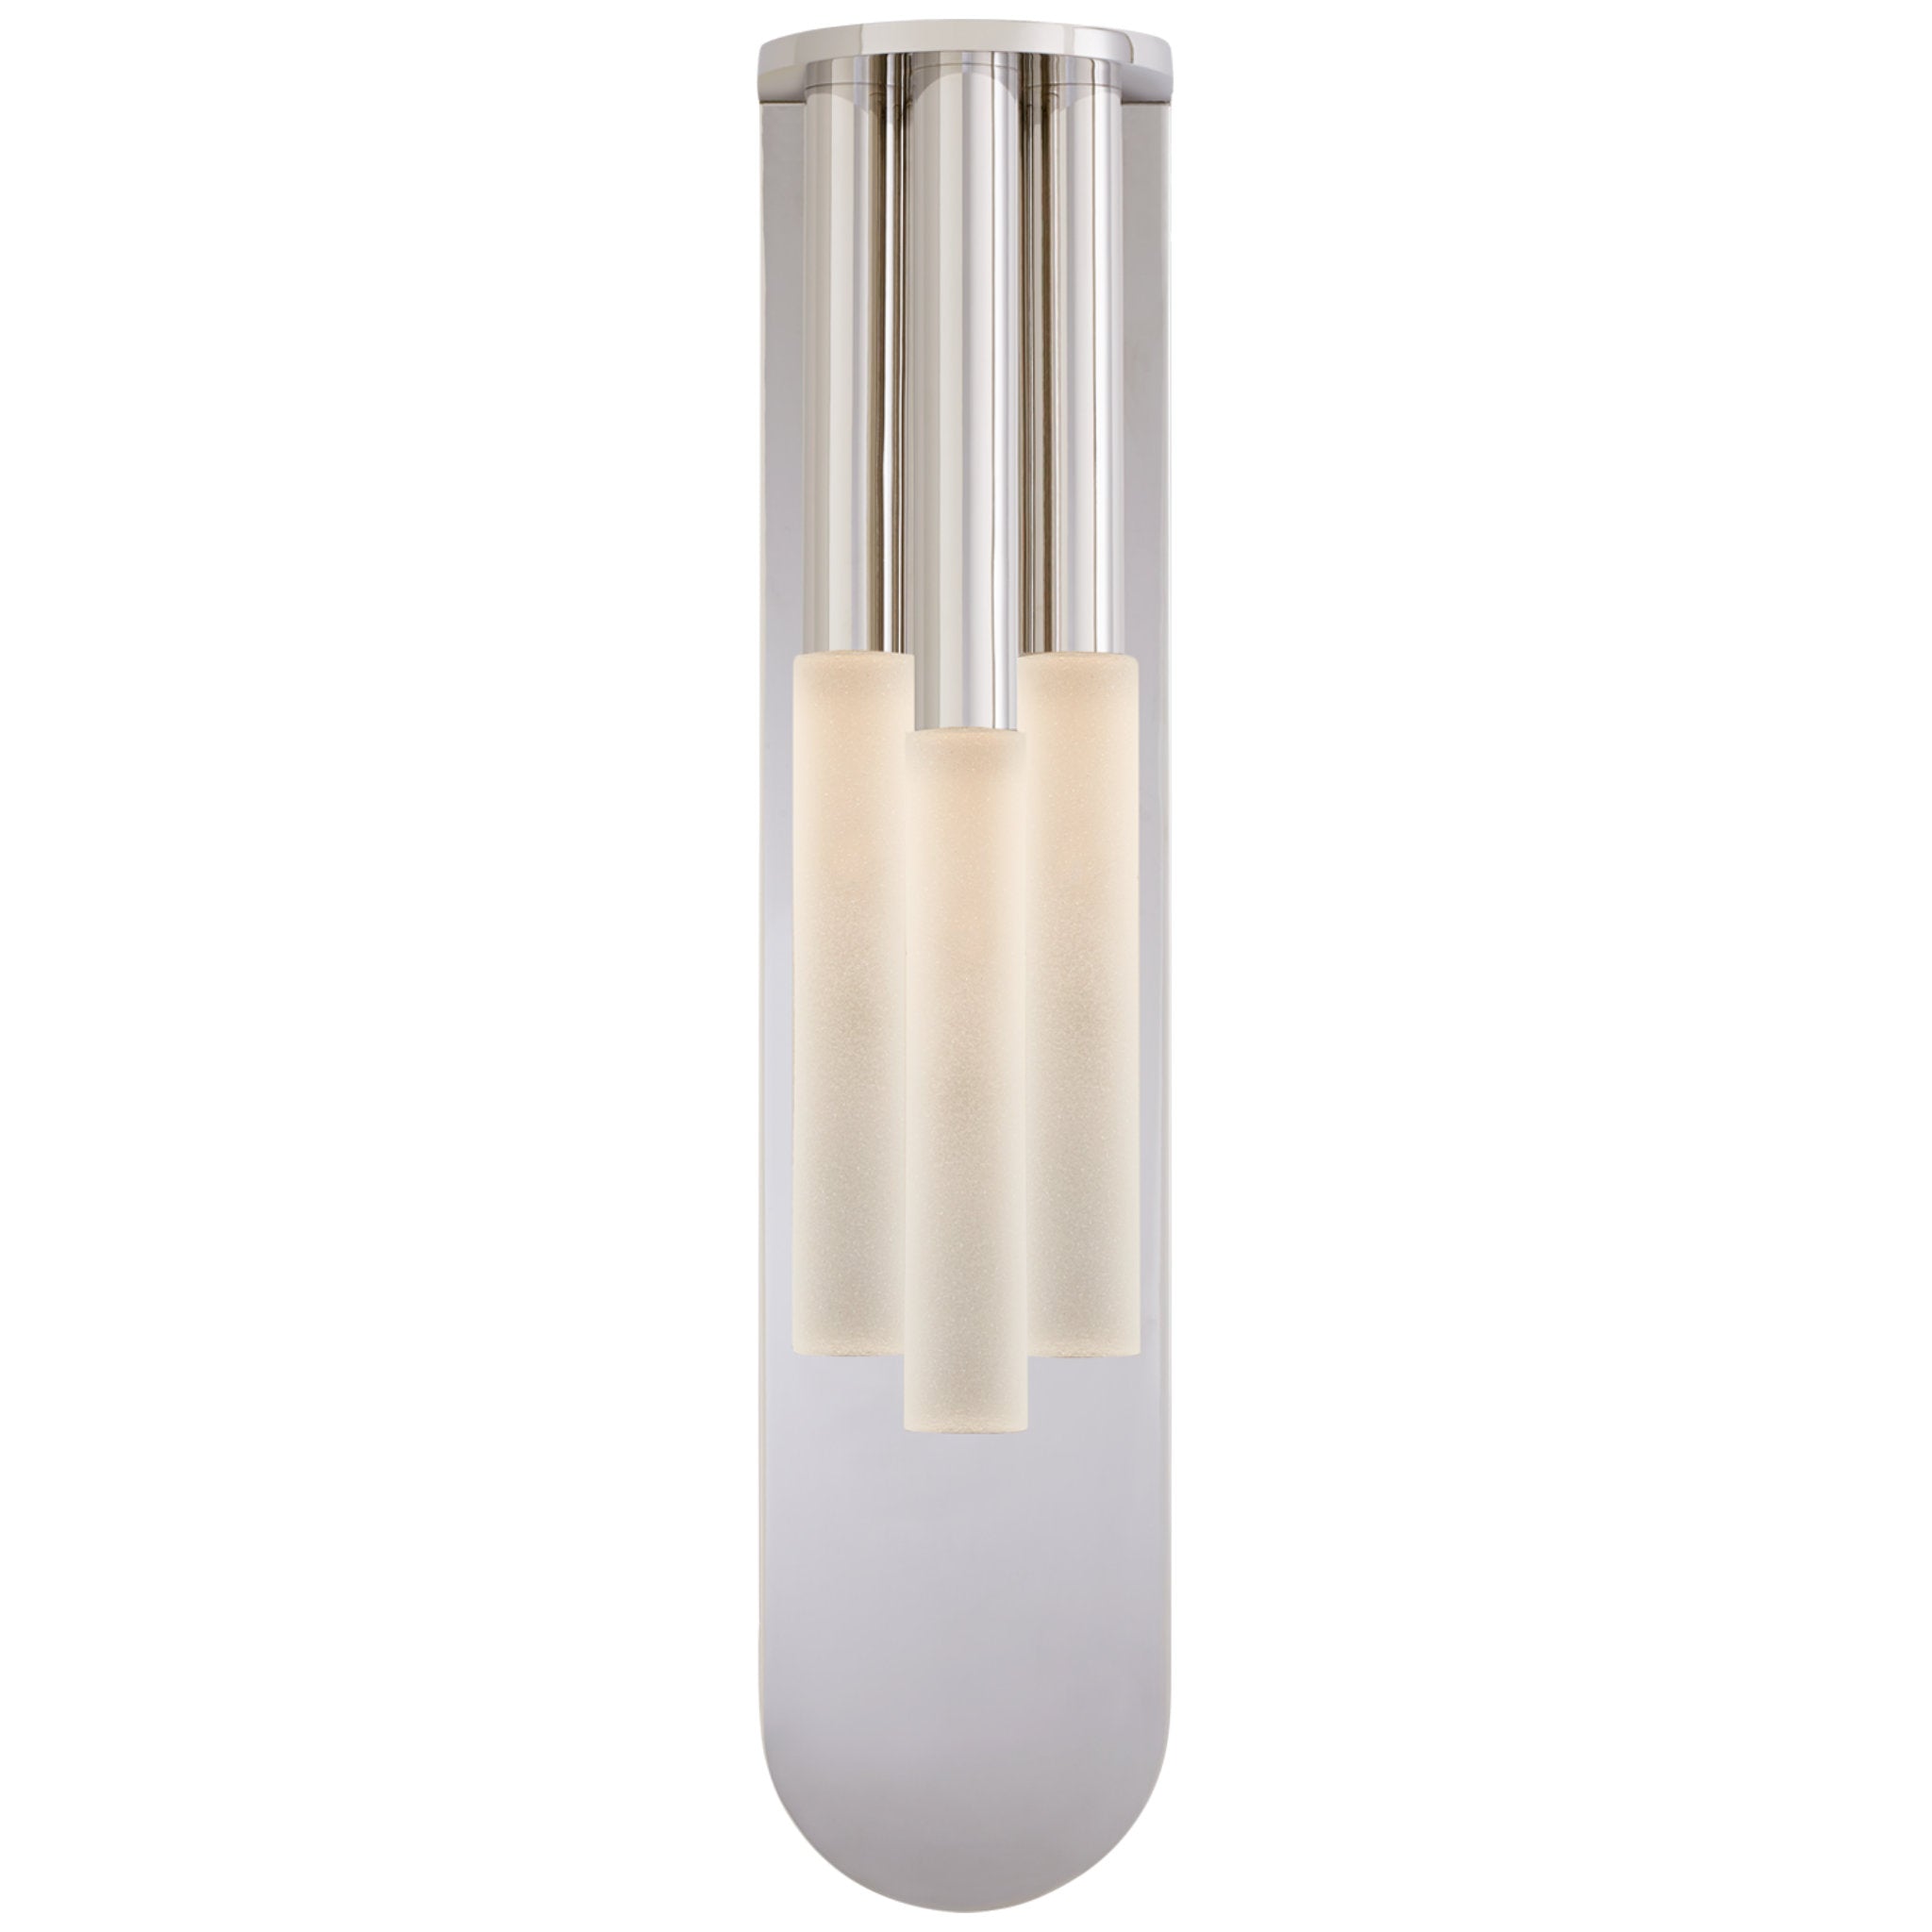 Kelly Wearstler Rousseau Medium Multi-Drop Sconce in Polished Nickel with Etched Crystal